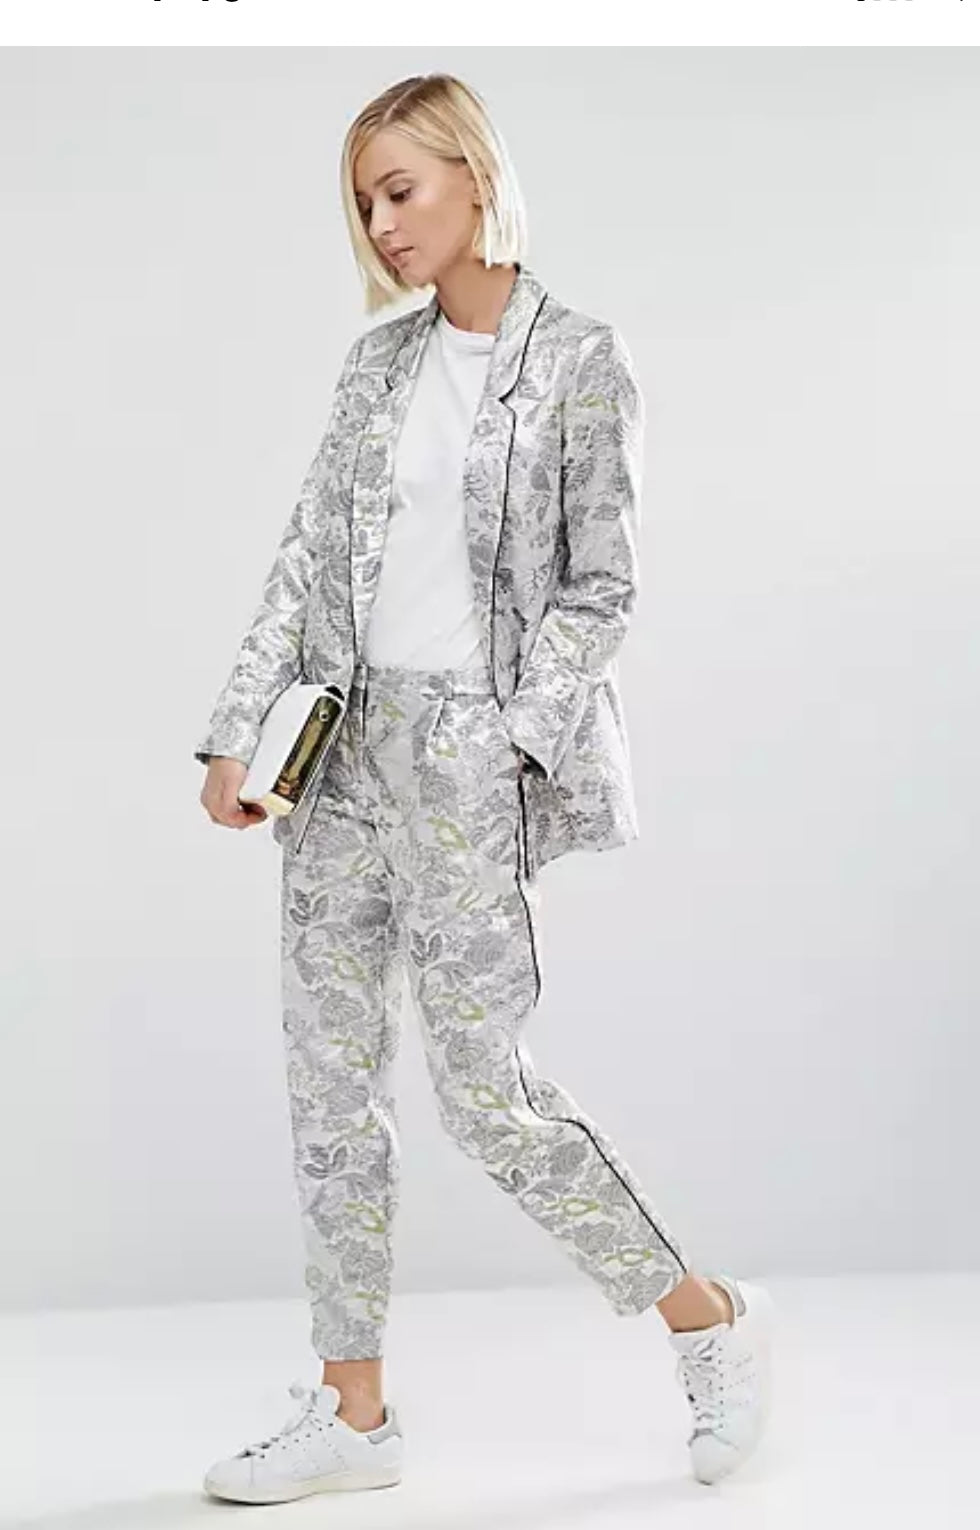 Silver Jacquard Jacket and Pant Suit - 2/4